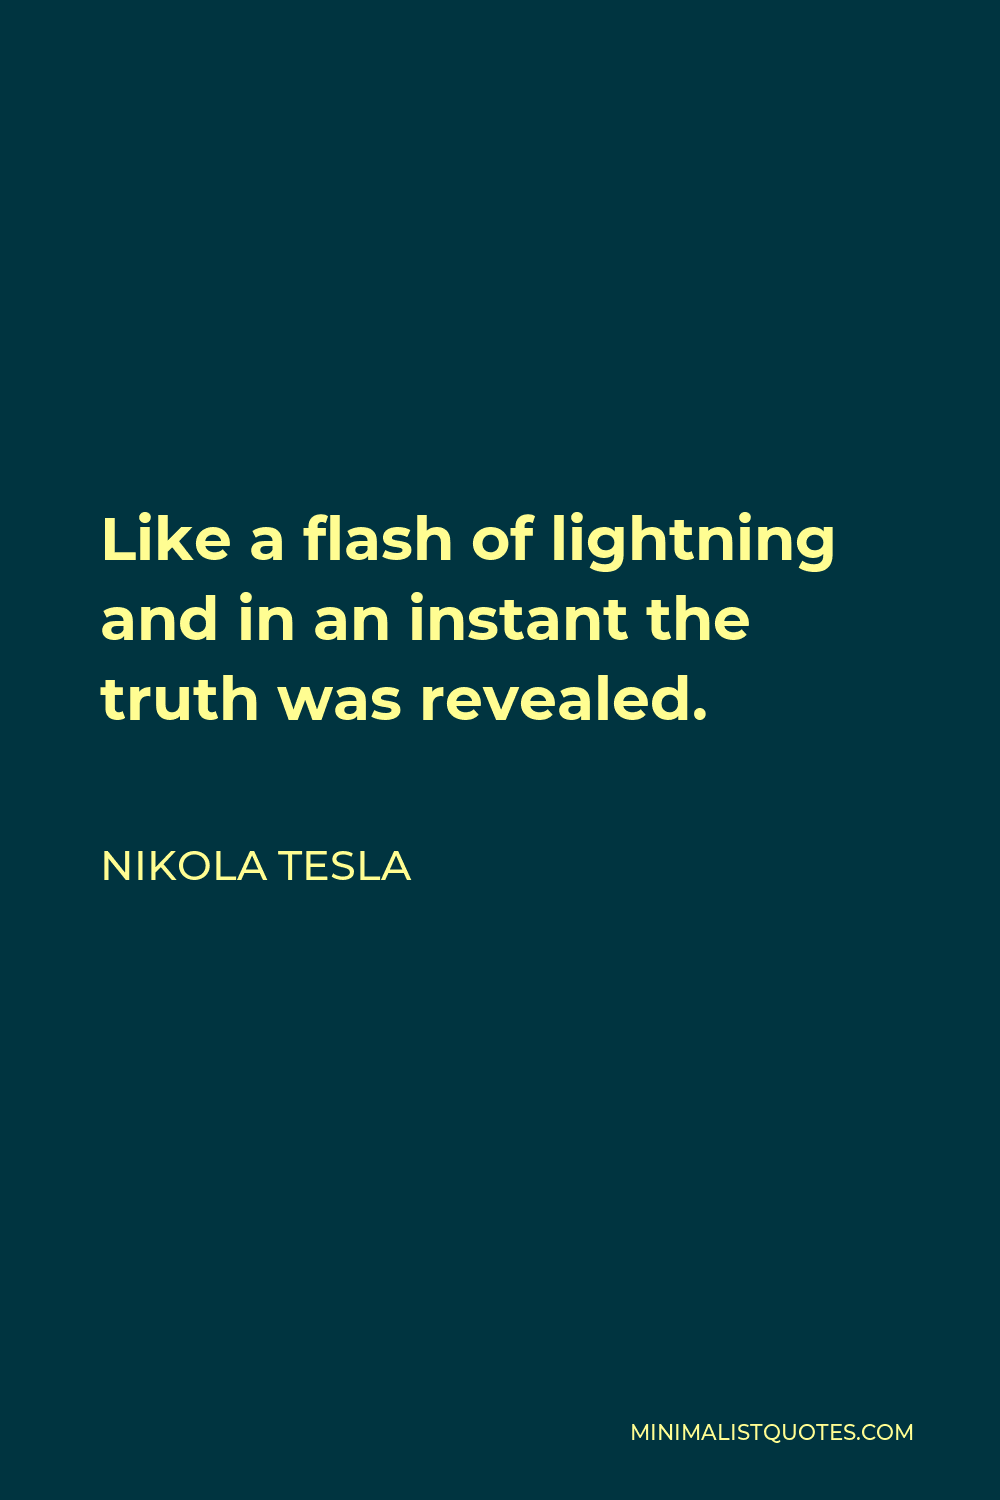 Nikola Tesla Quote - Like a flash of lightning and in an instant the truth was revealed.